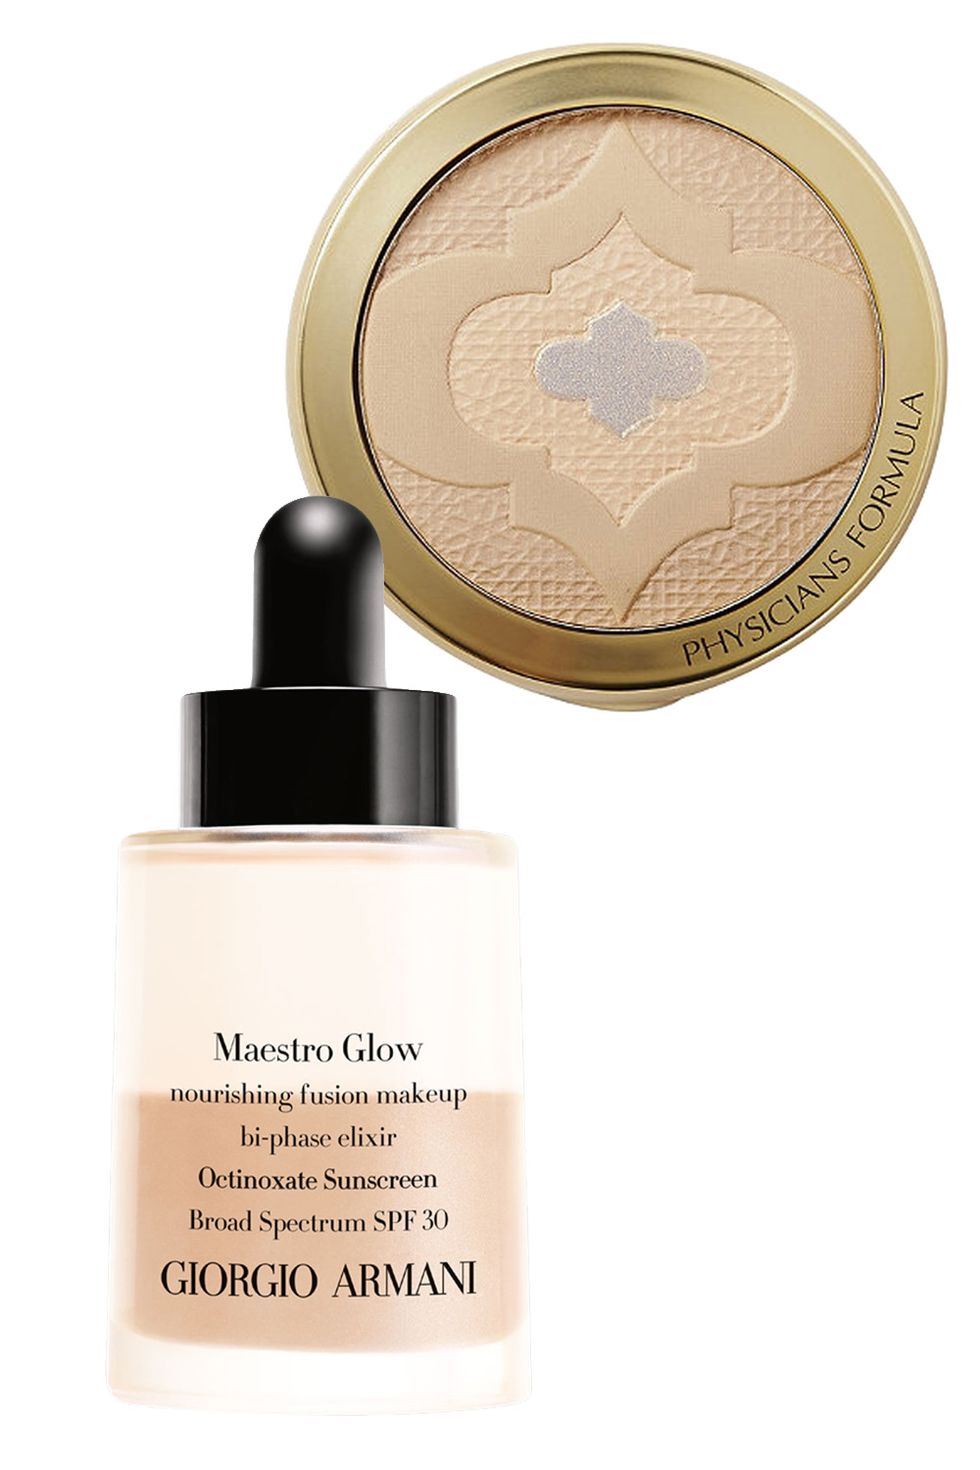 <p>Giorgio Armani foundations can't be beat for faking complexion perfection so you can imagine the kind of black magic that its new <a href="http://www.giorgioarmanibeauty-usa.com/maestro-glow/A3994,default,pd.html" target="_blank">Maestro Glow</a>, infused with a blend of nourishing oils, will work on your face. Let's just say your future face looks bright. Though powders seem inherently drying, <a href="http://www.ulta.com/ulta/browse/productDetail.jsp?productId=xlsImpprod13621015" target="_blank">Physicians Formula Argan Wear Ultra-Nourishing Face Powder</a> is, as the name implies, anything but thanks to an infusion of 100% argan oil.</p>